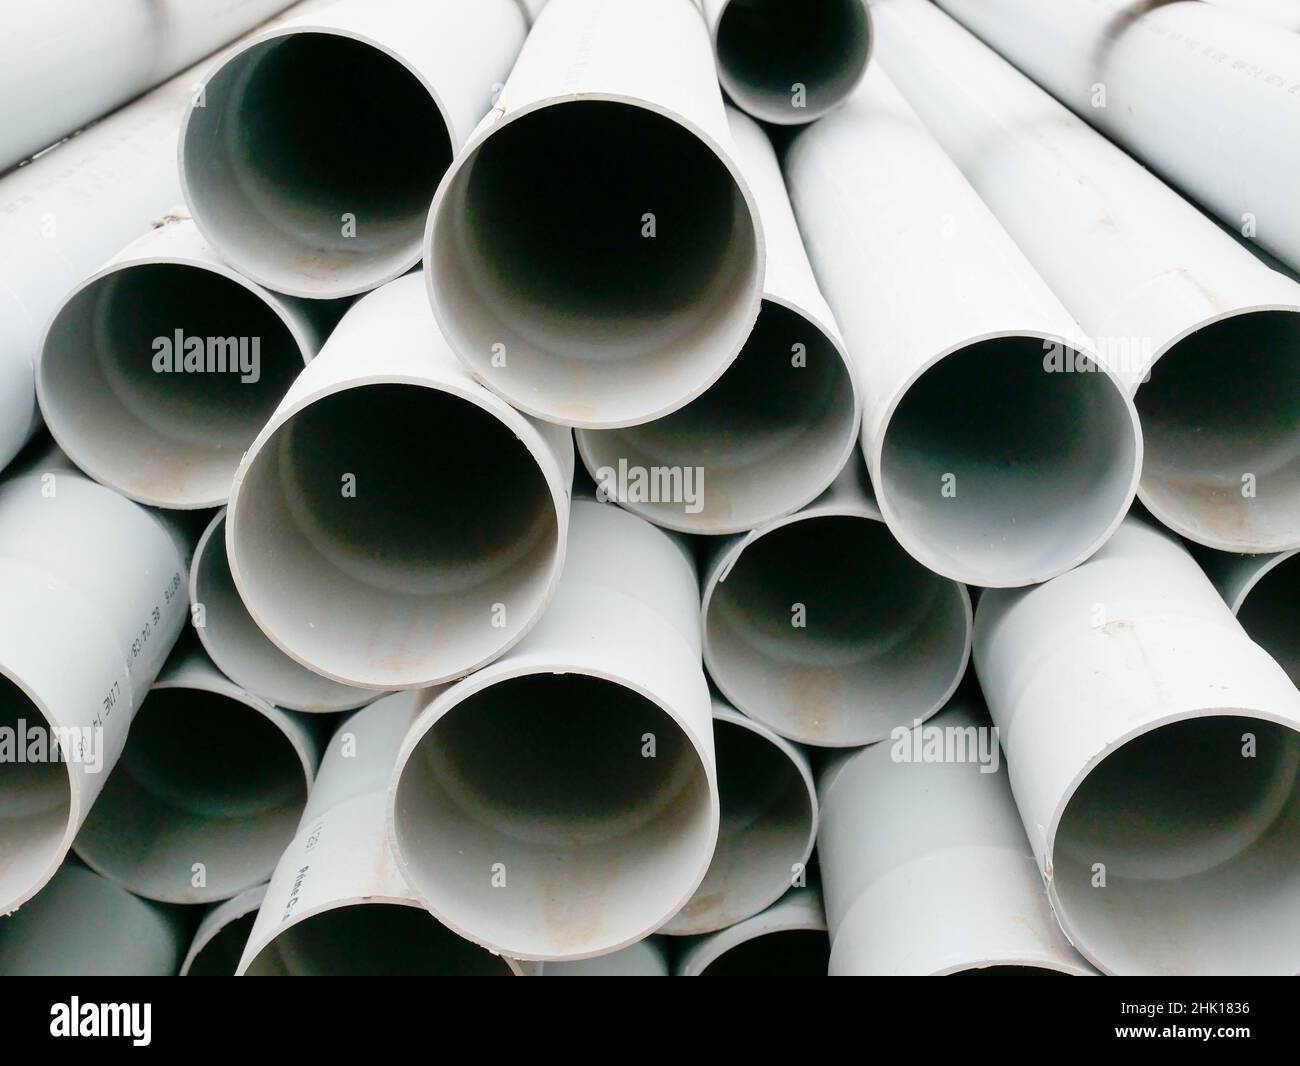 Stack of PVC pipes Stock Photo